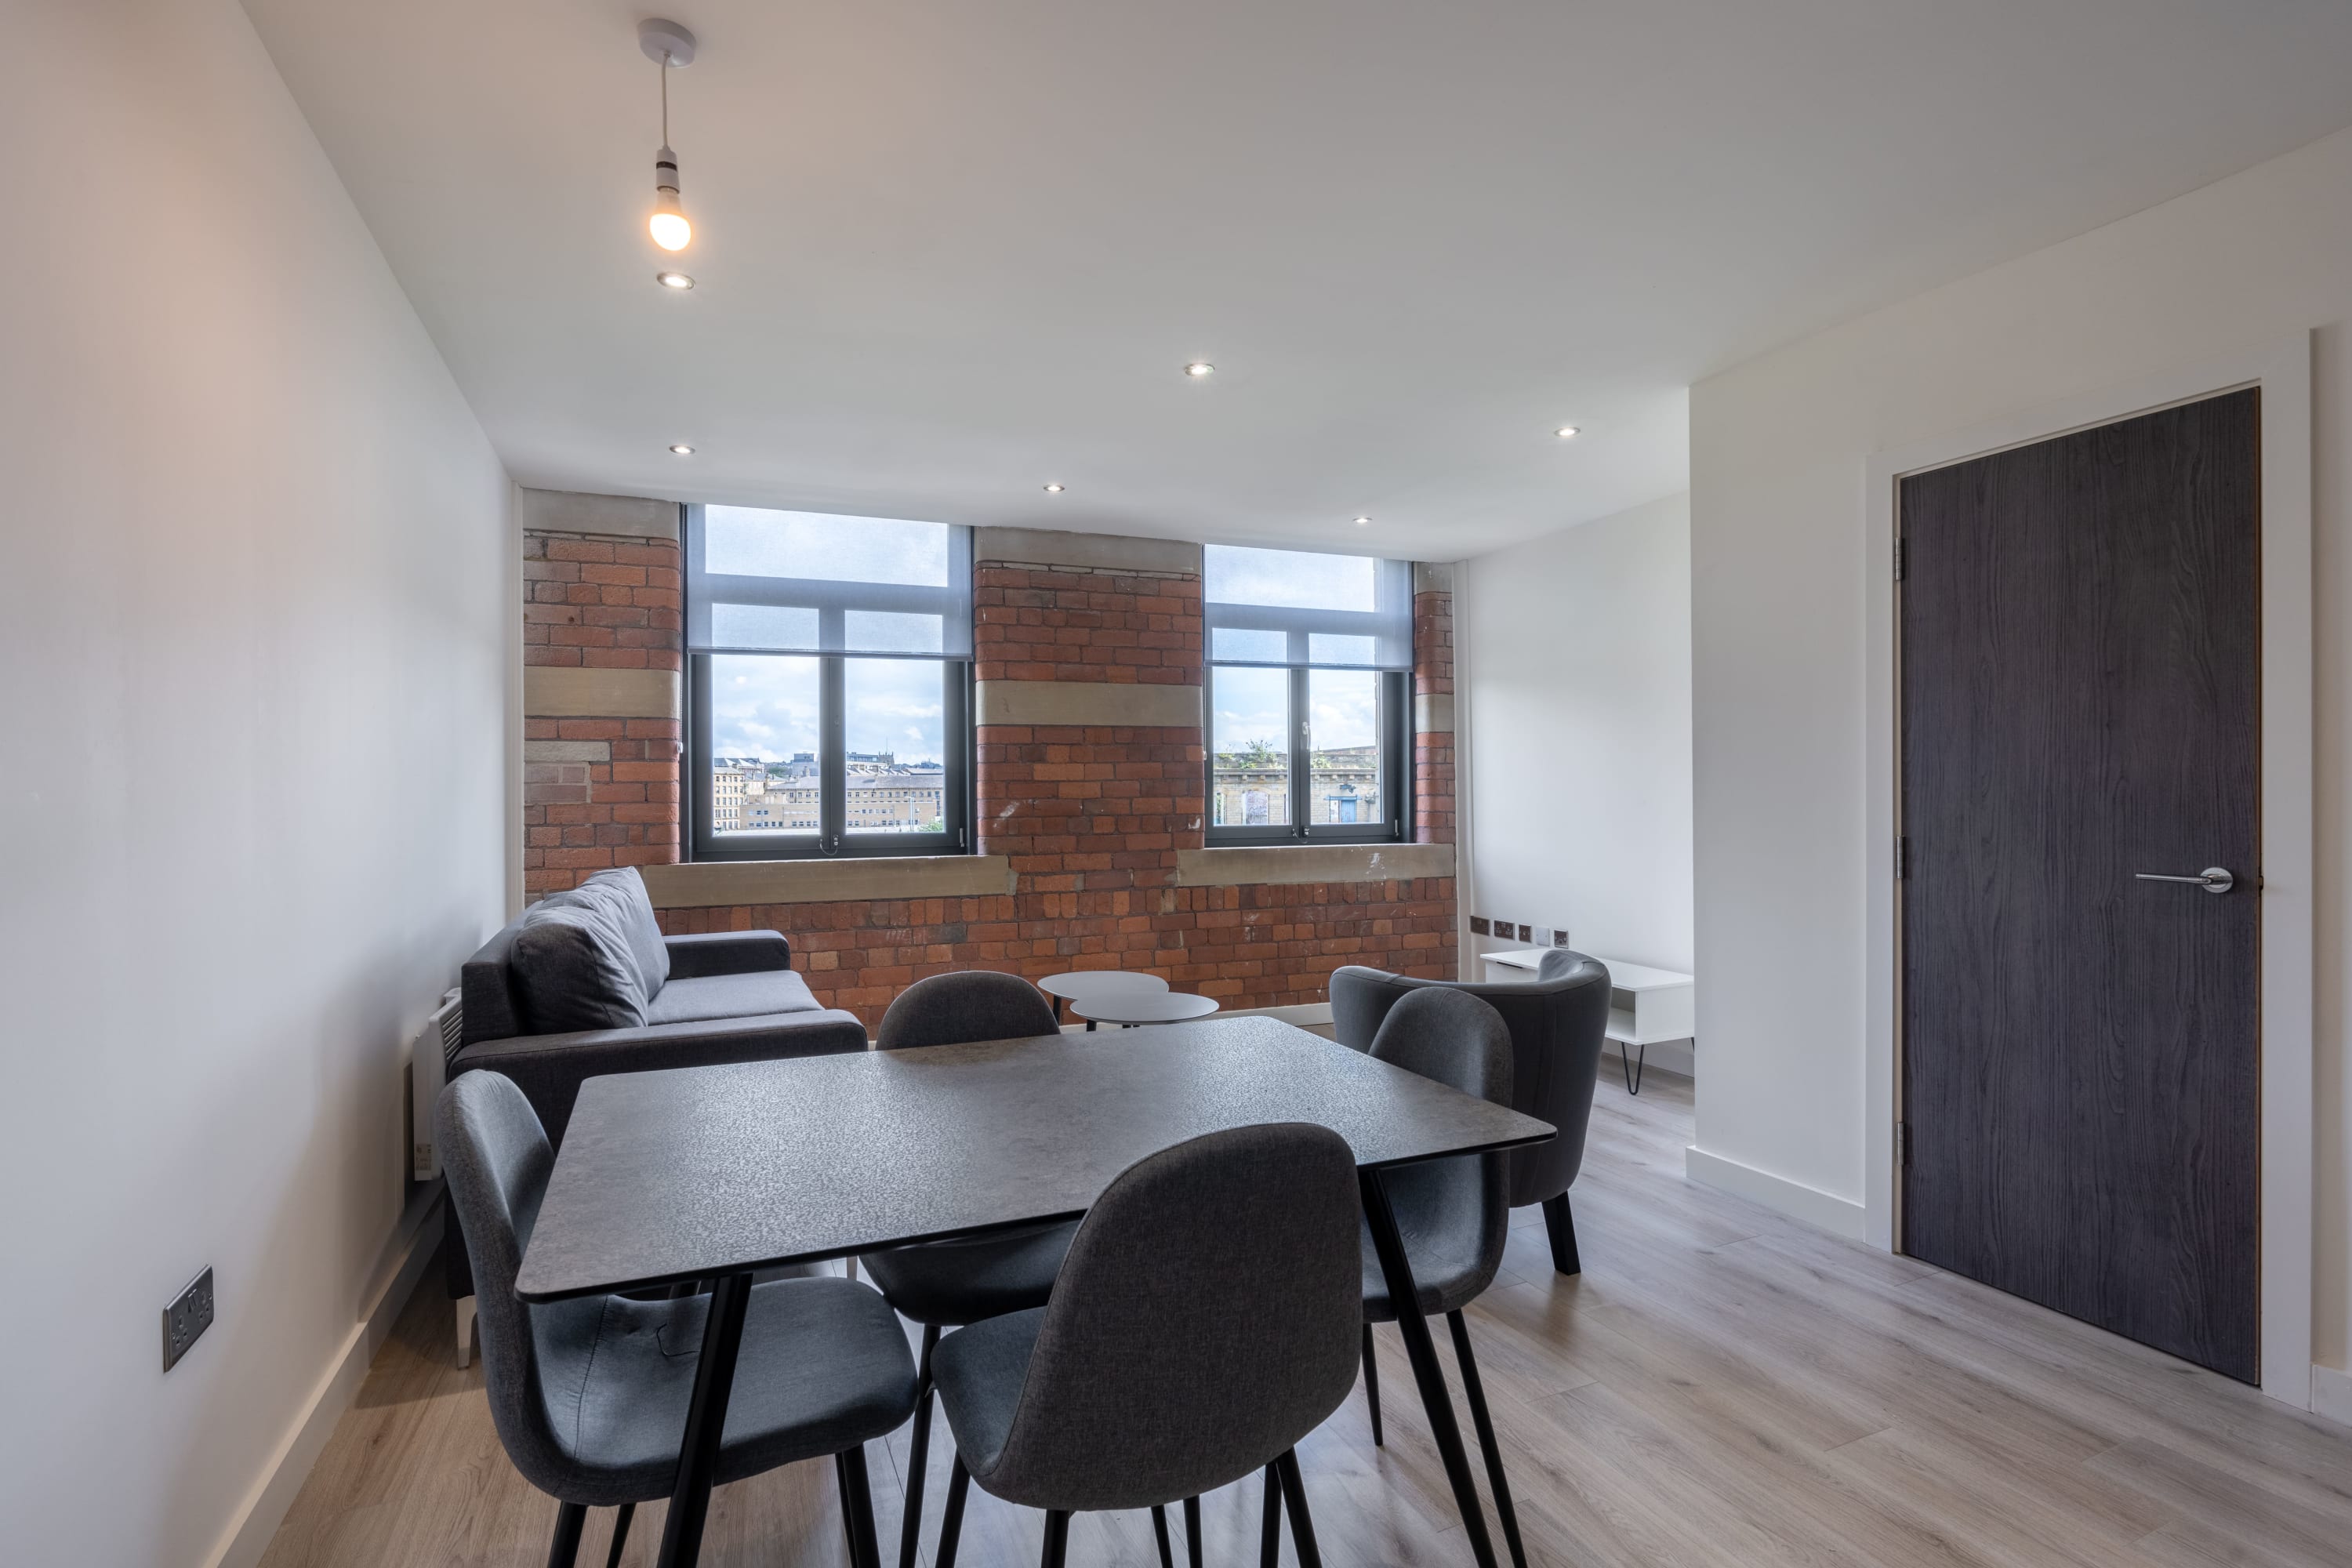 Property Image 2 - Stunning 2 bed Apartment in an Award Winning Development